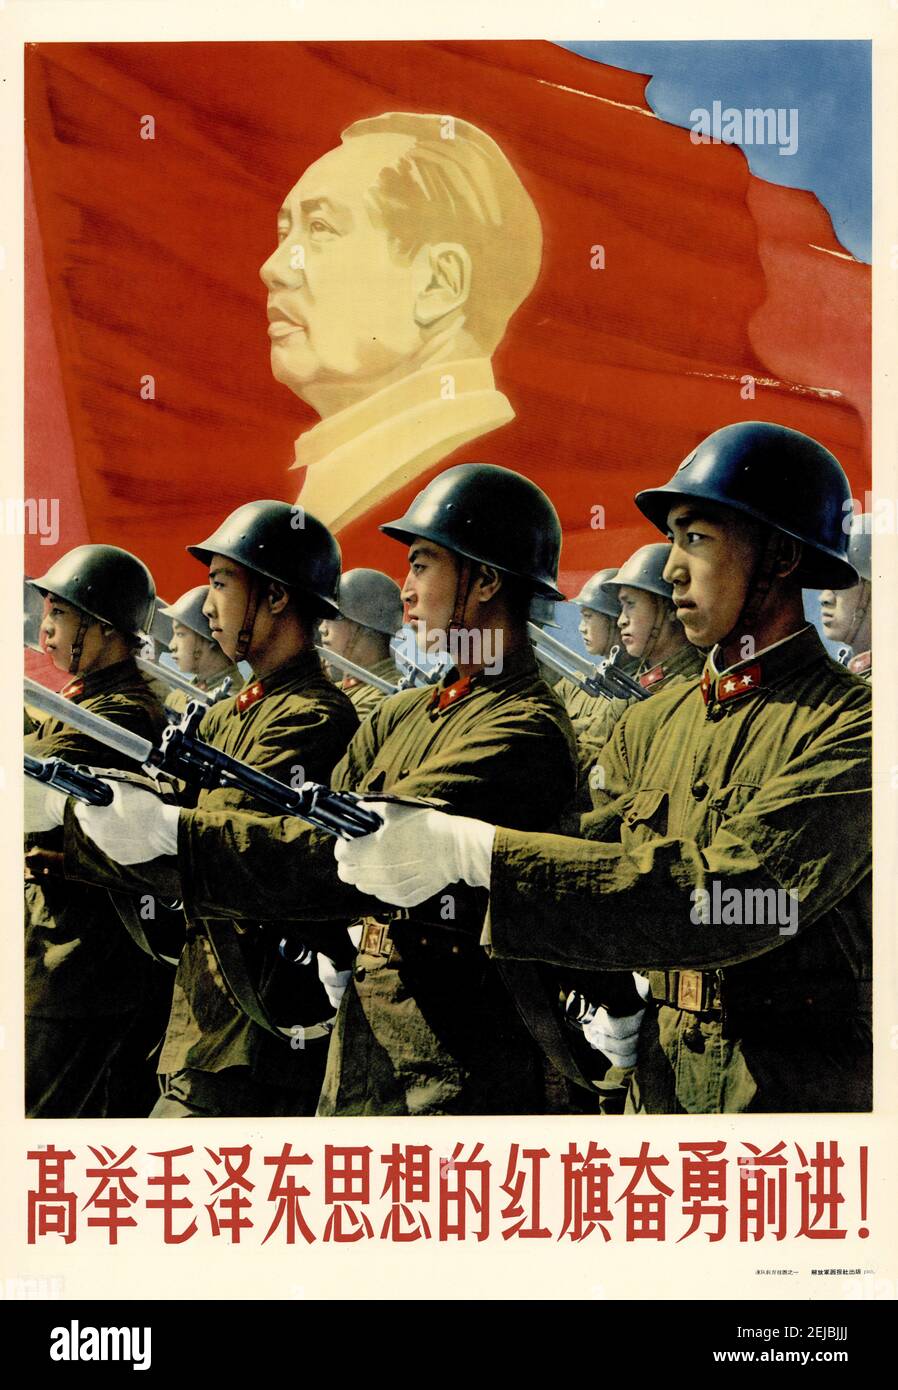 Hold high the great red flag of Mao Zedong Thought. Museum: PRIVATE COLLECTION. Author: ANONYMOUS. Stock Photo